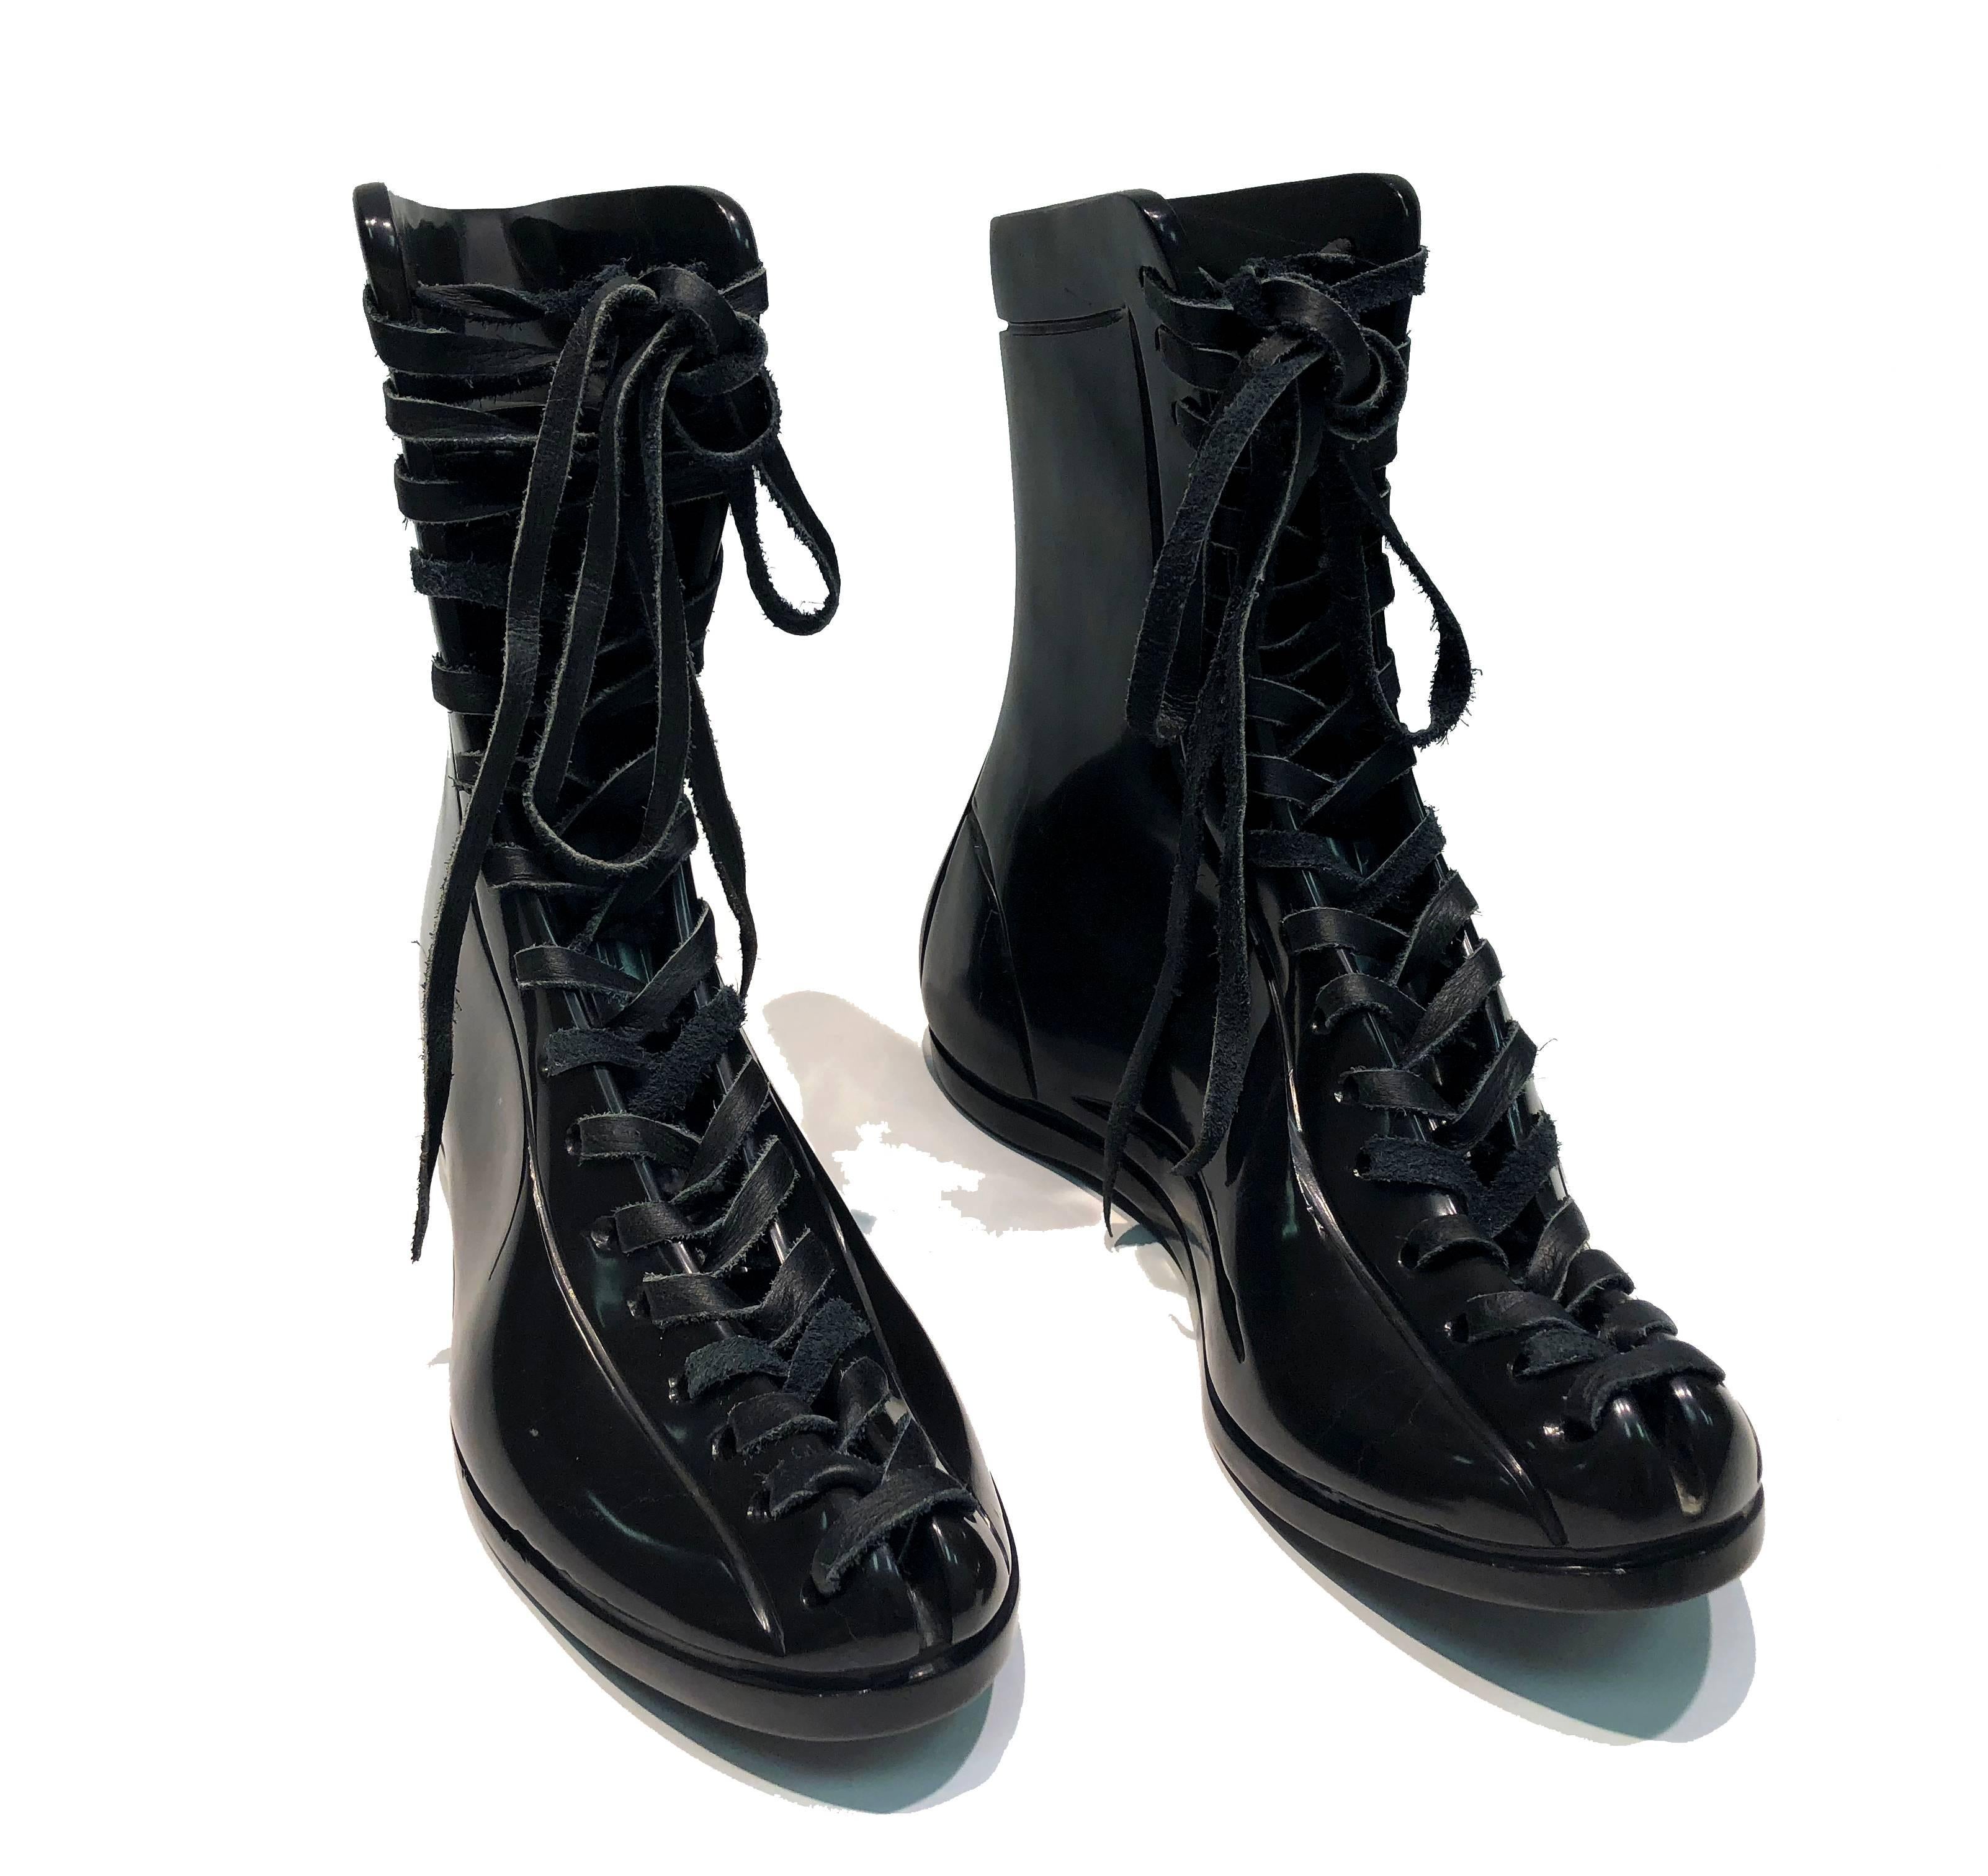 This is a gorgeous hand-carved black marble pair of boots. The marble is polished and has an amazing tactile feeling. 

These pieces celebrates our connection to everyday objects and reminds us of the importance of our tactile senses that nowadays